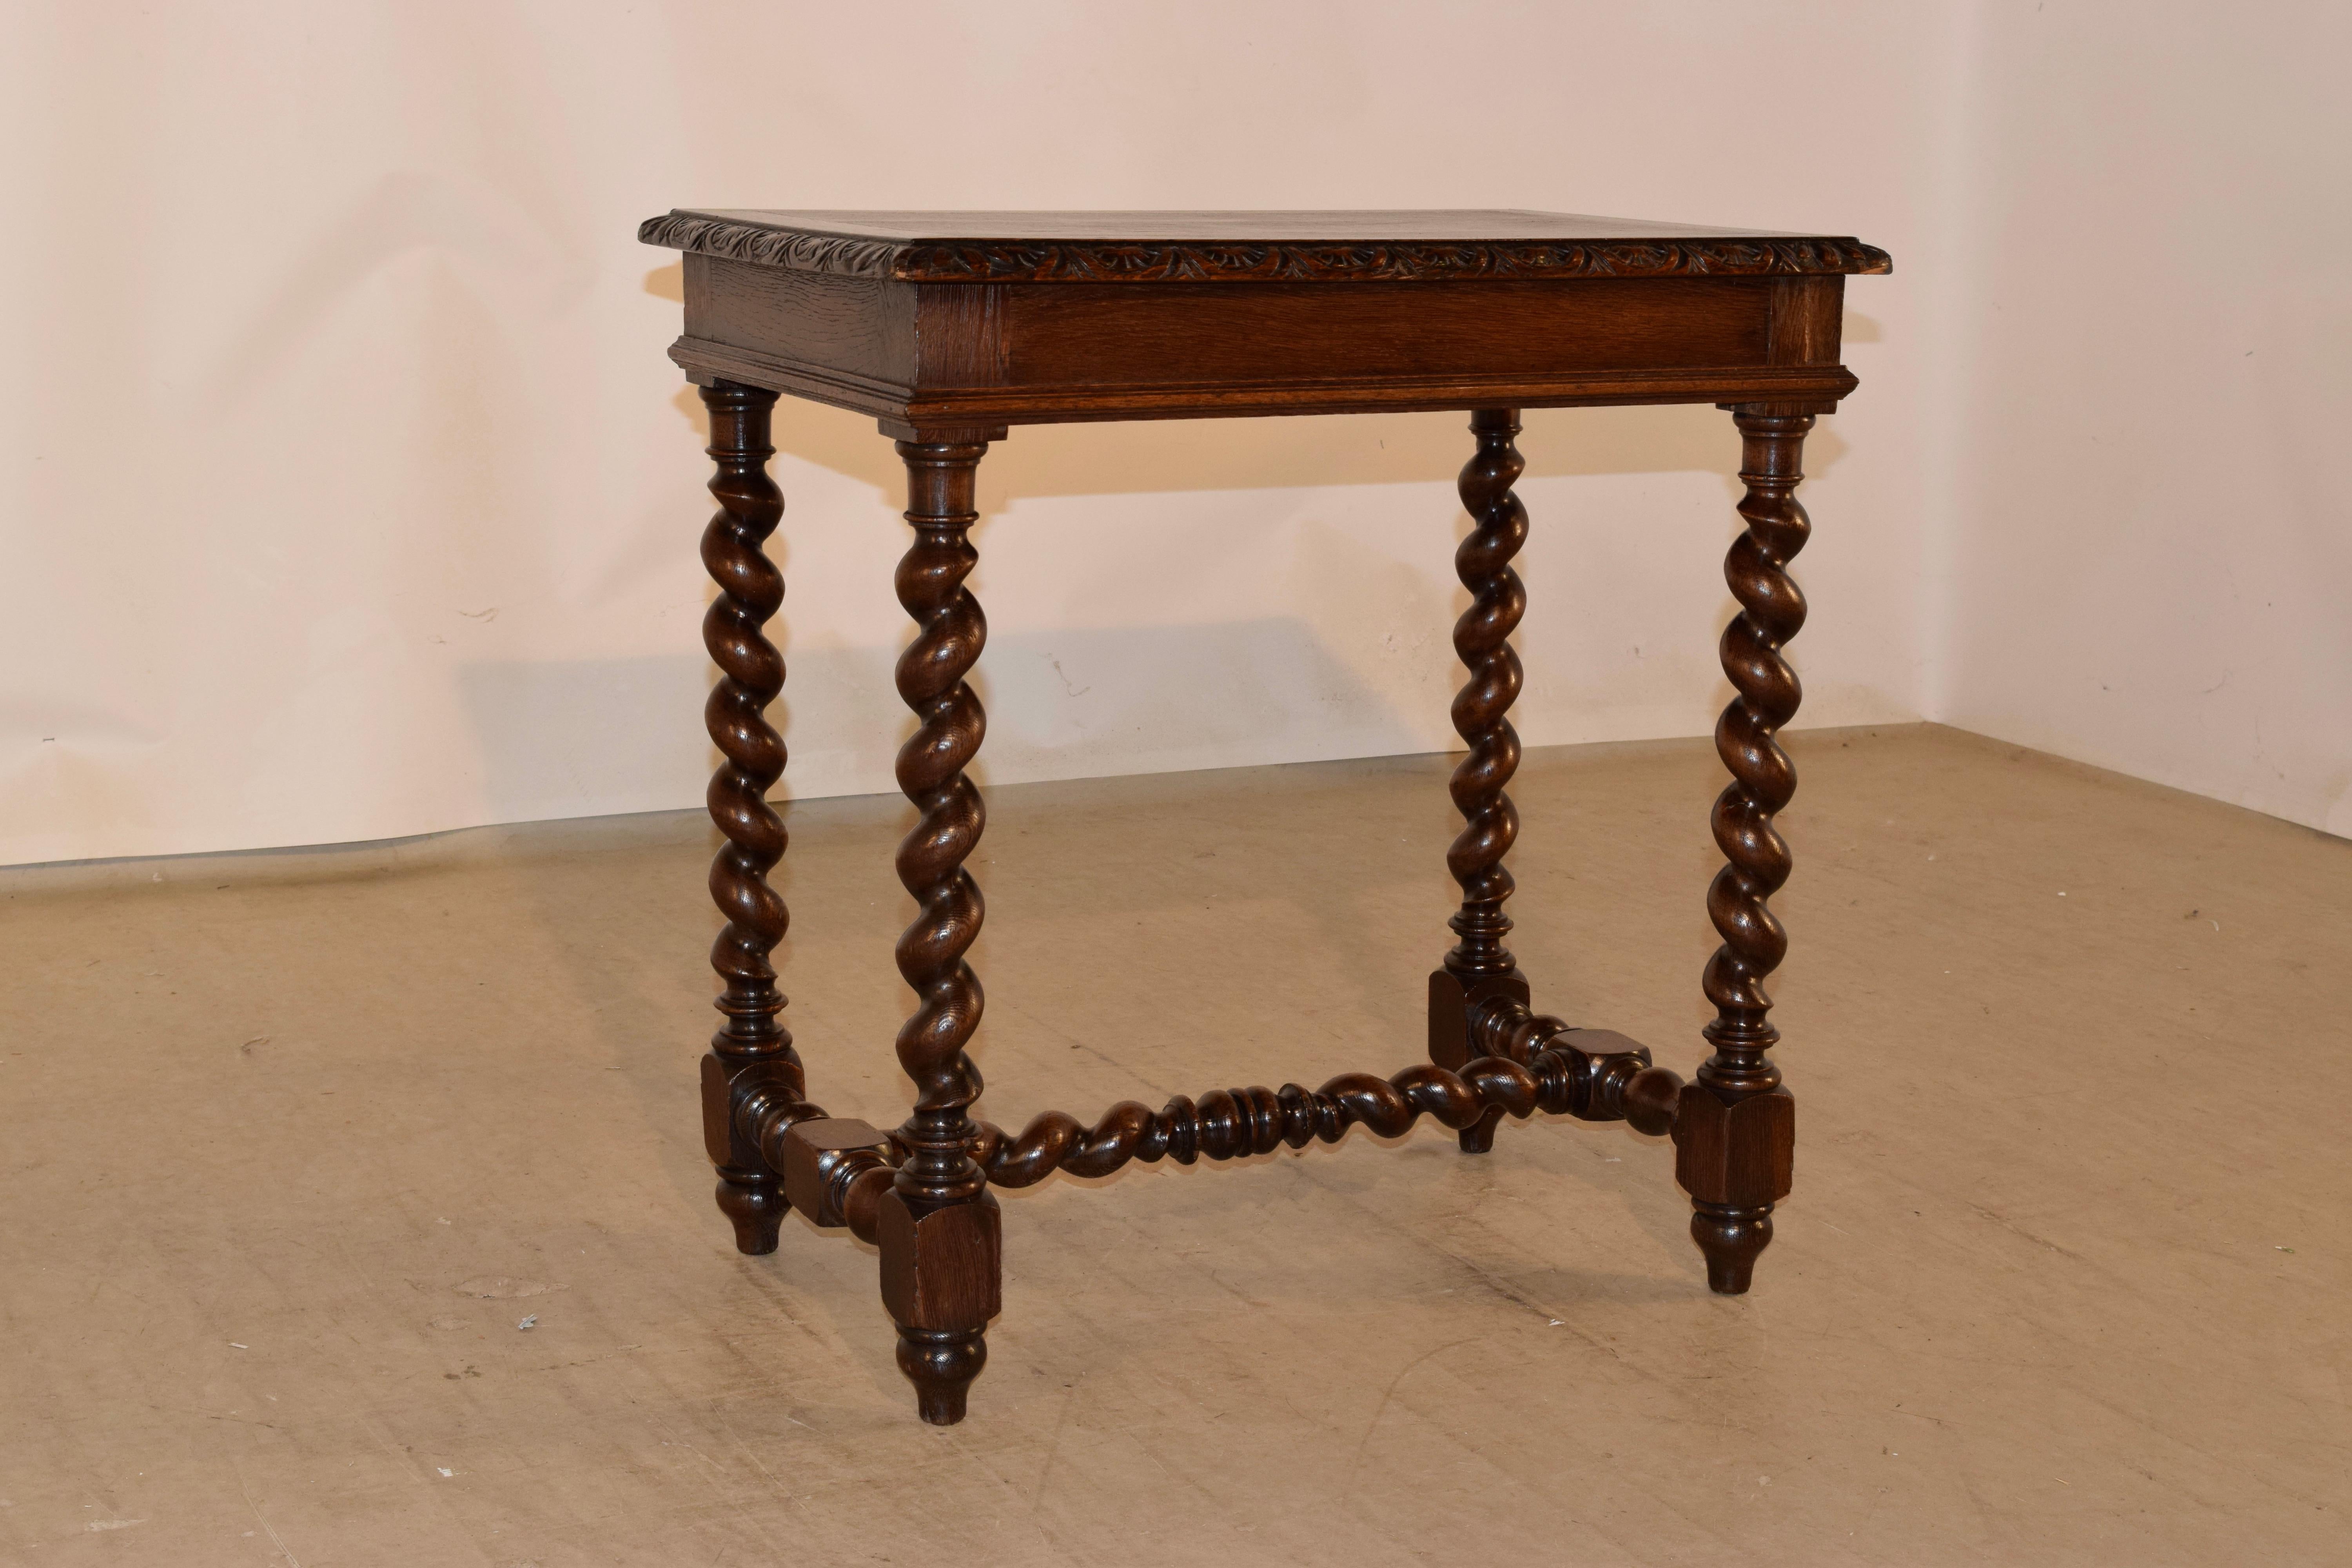 19th century oak side table from France made from oak. The top is banded and has a beveled and carved decorated edge around the top, following down to a simple apron, which has a molded edge and is supported on hand turned barley twist legs, joined